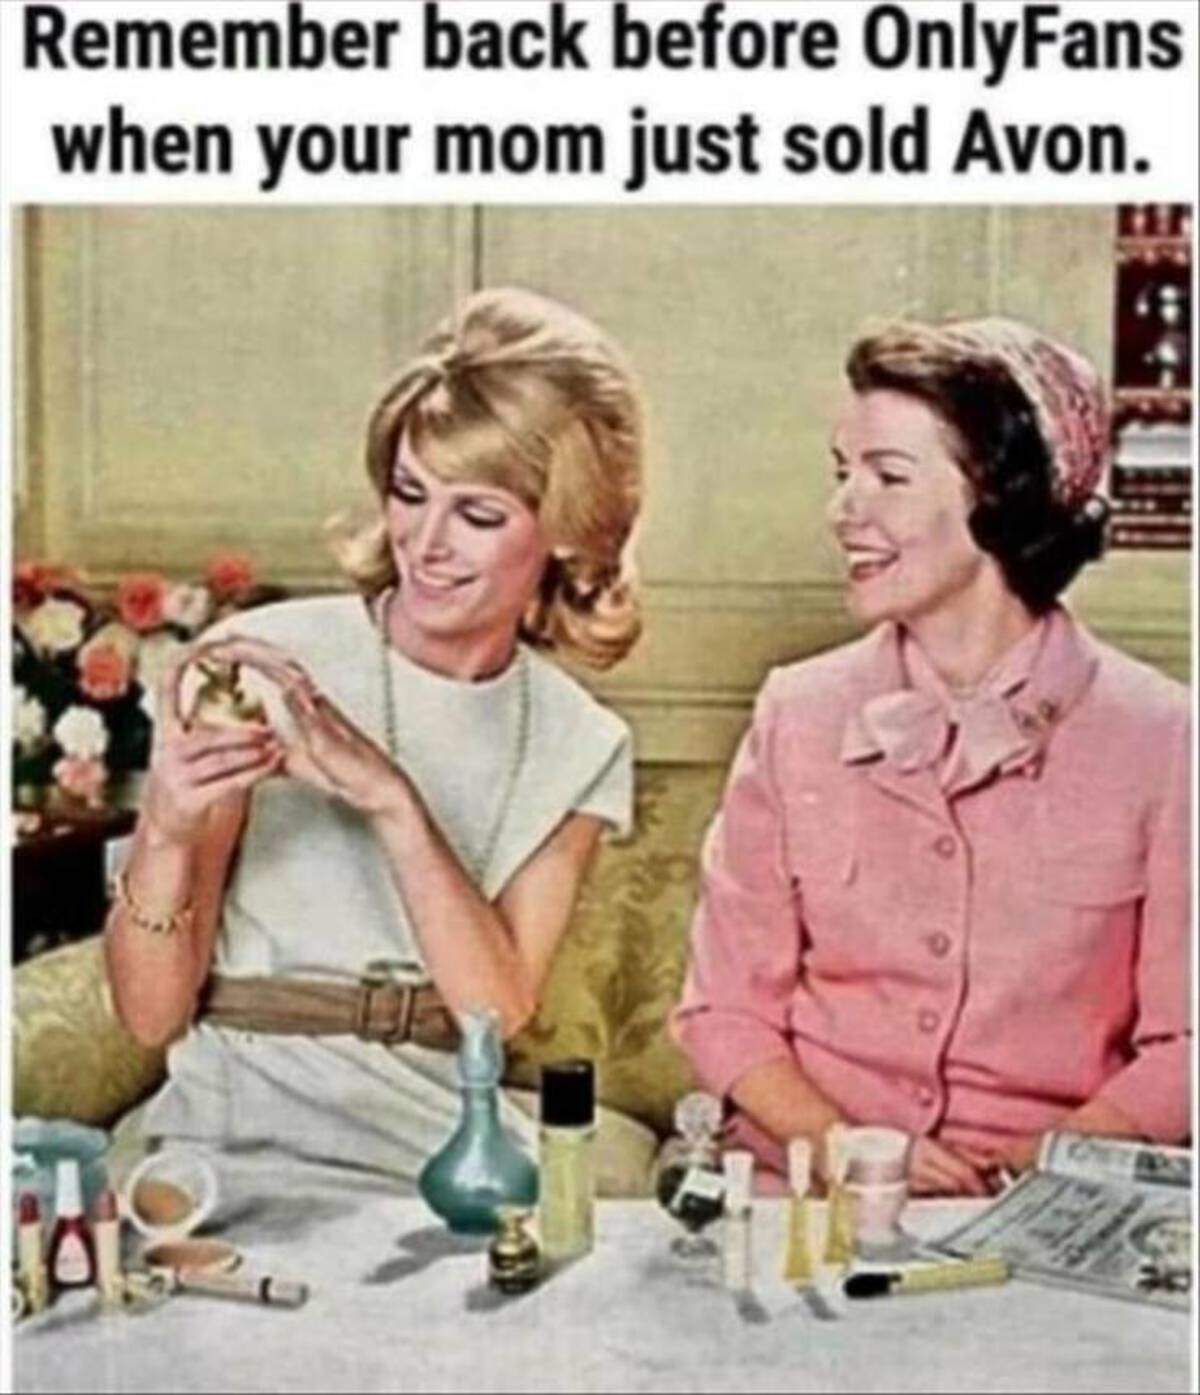 avon lady 1970s - Remember back before OnlyFans when your mom just sold Avon.